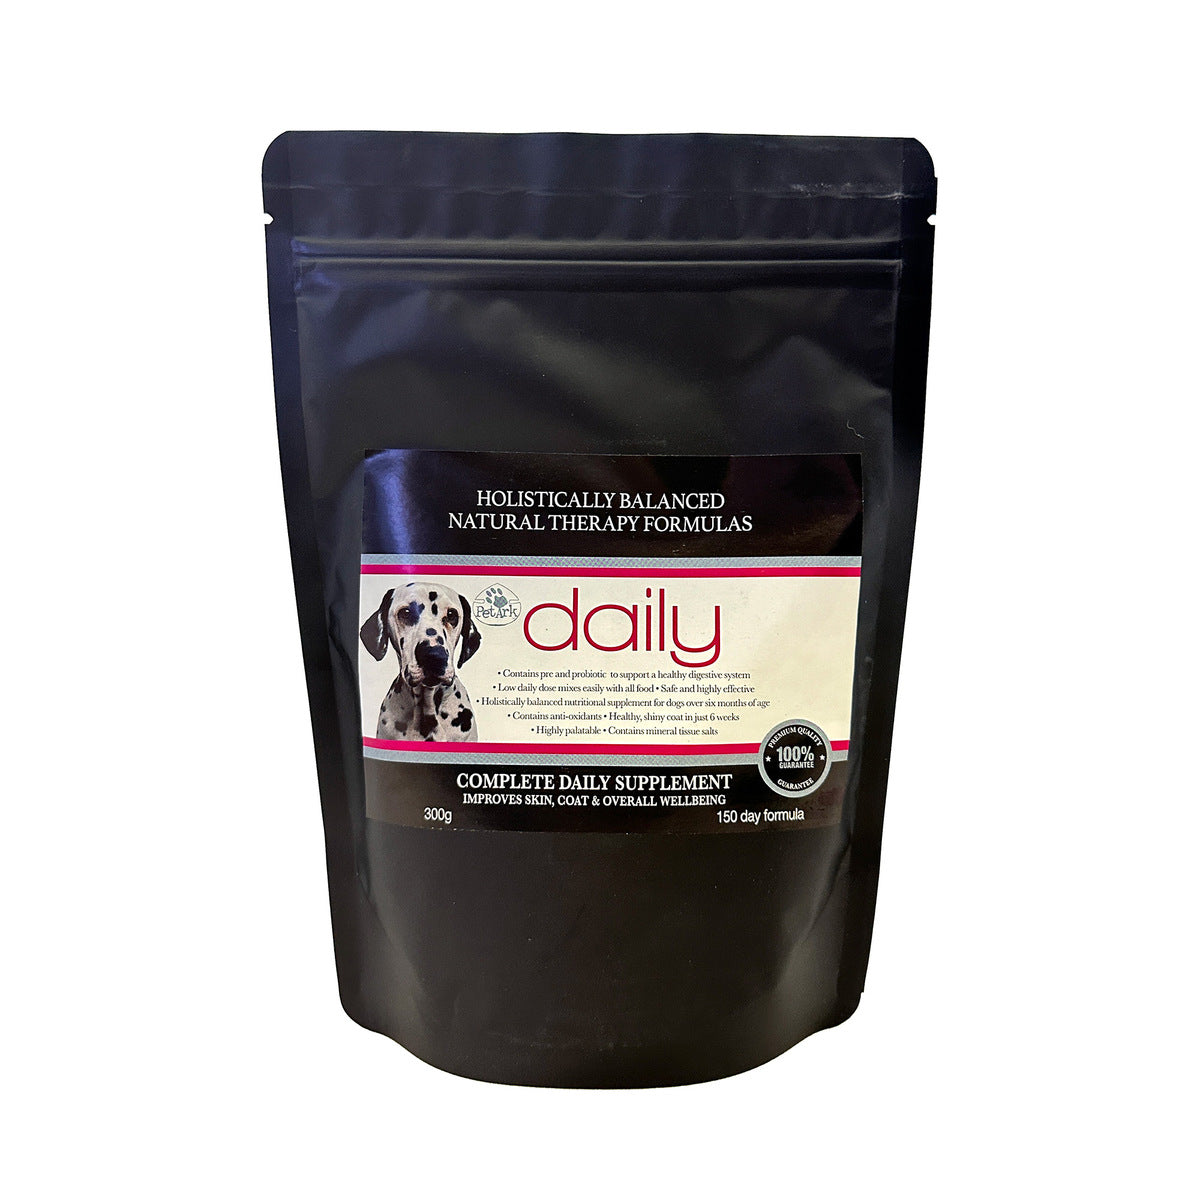 PetArk Daily Complete Supplement for Dogs